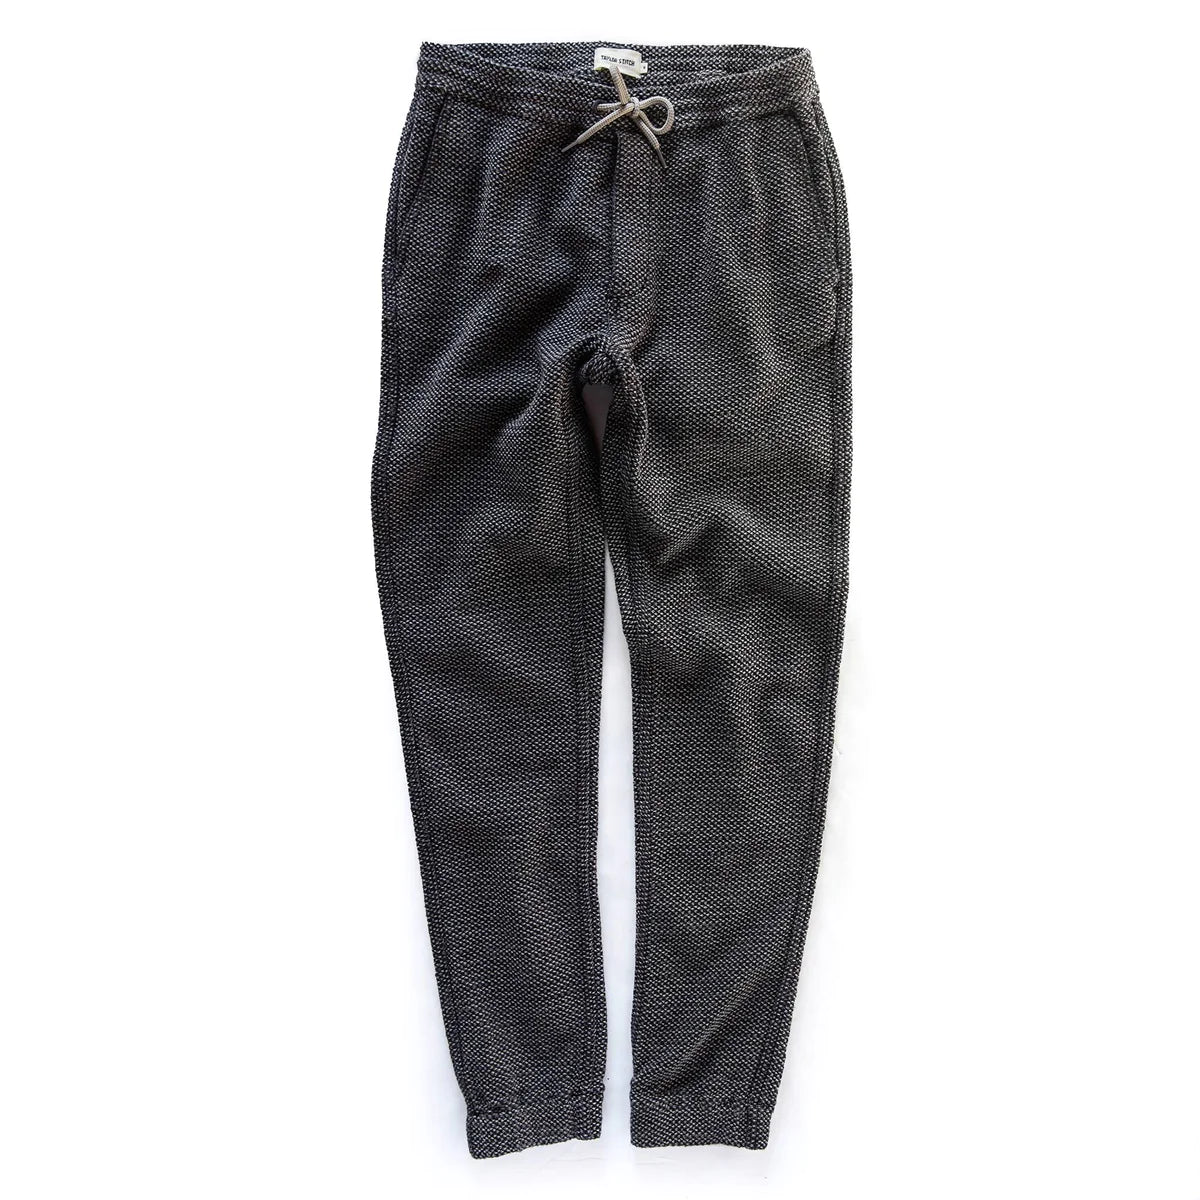 Taylor Stitch - The Apres Pant in Charcoal Shashiko